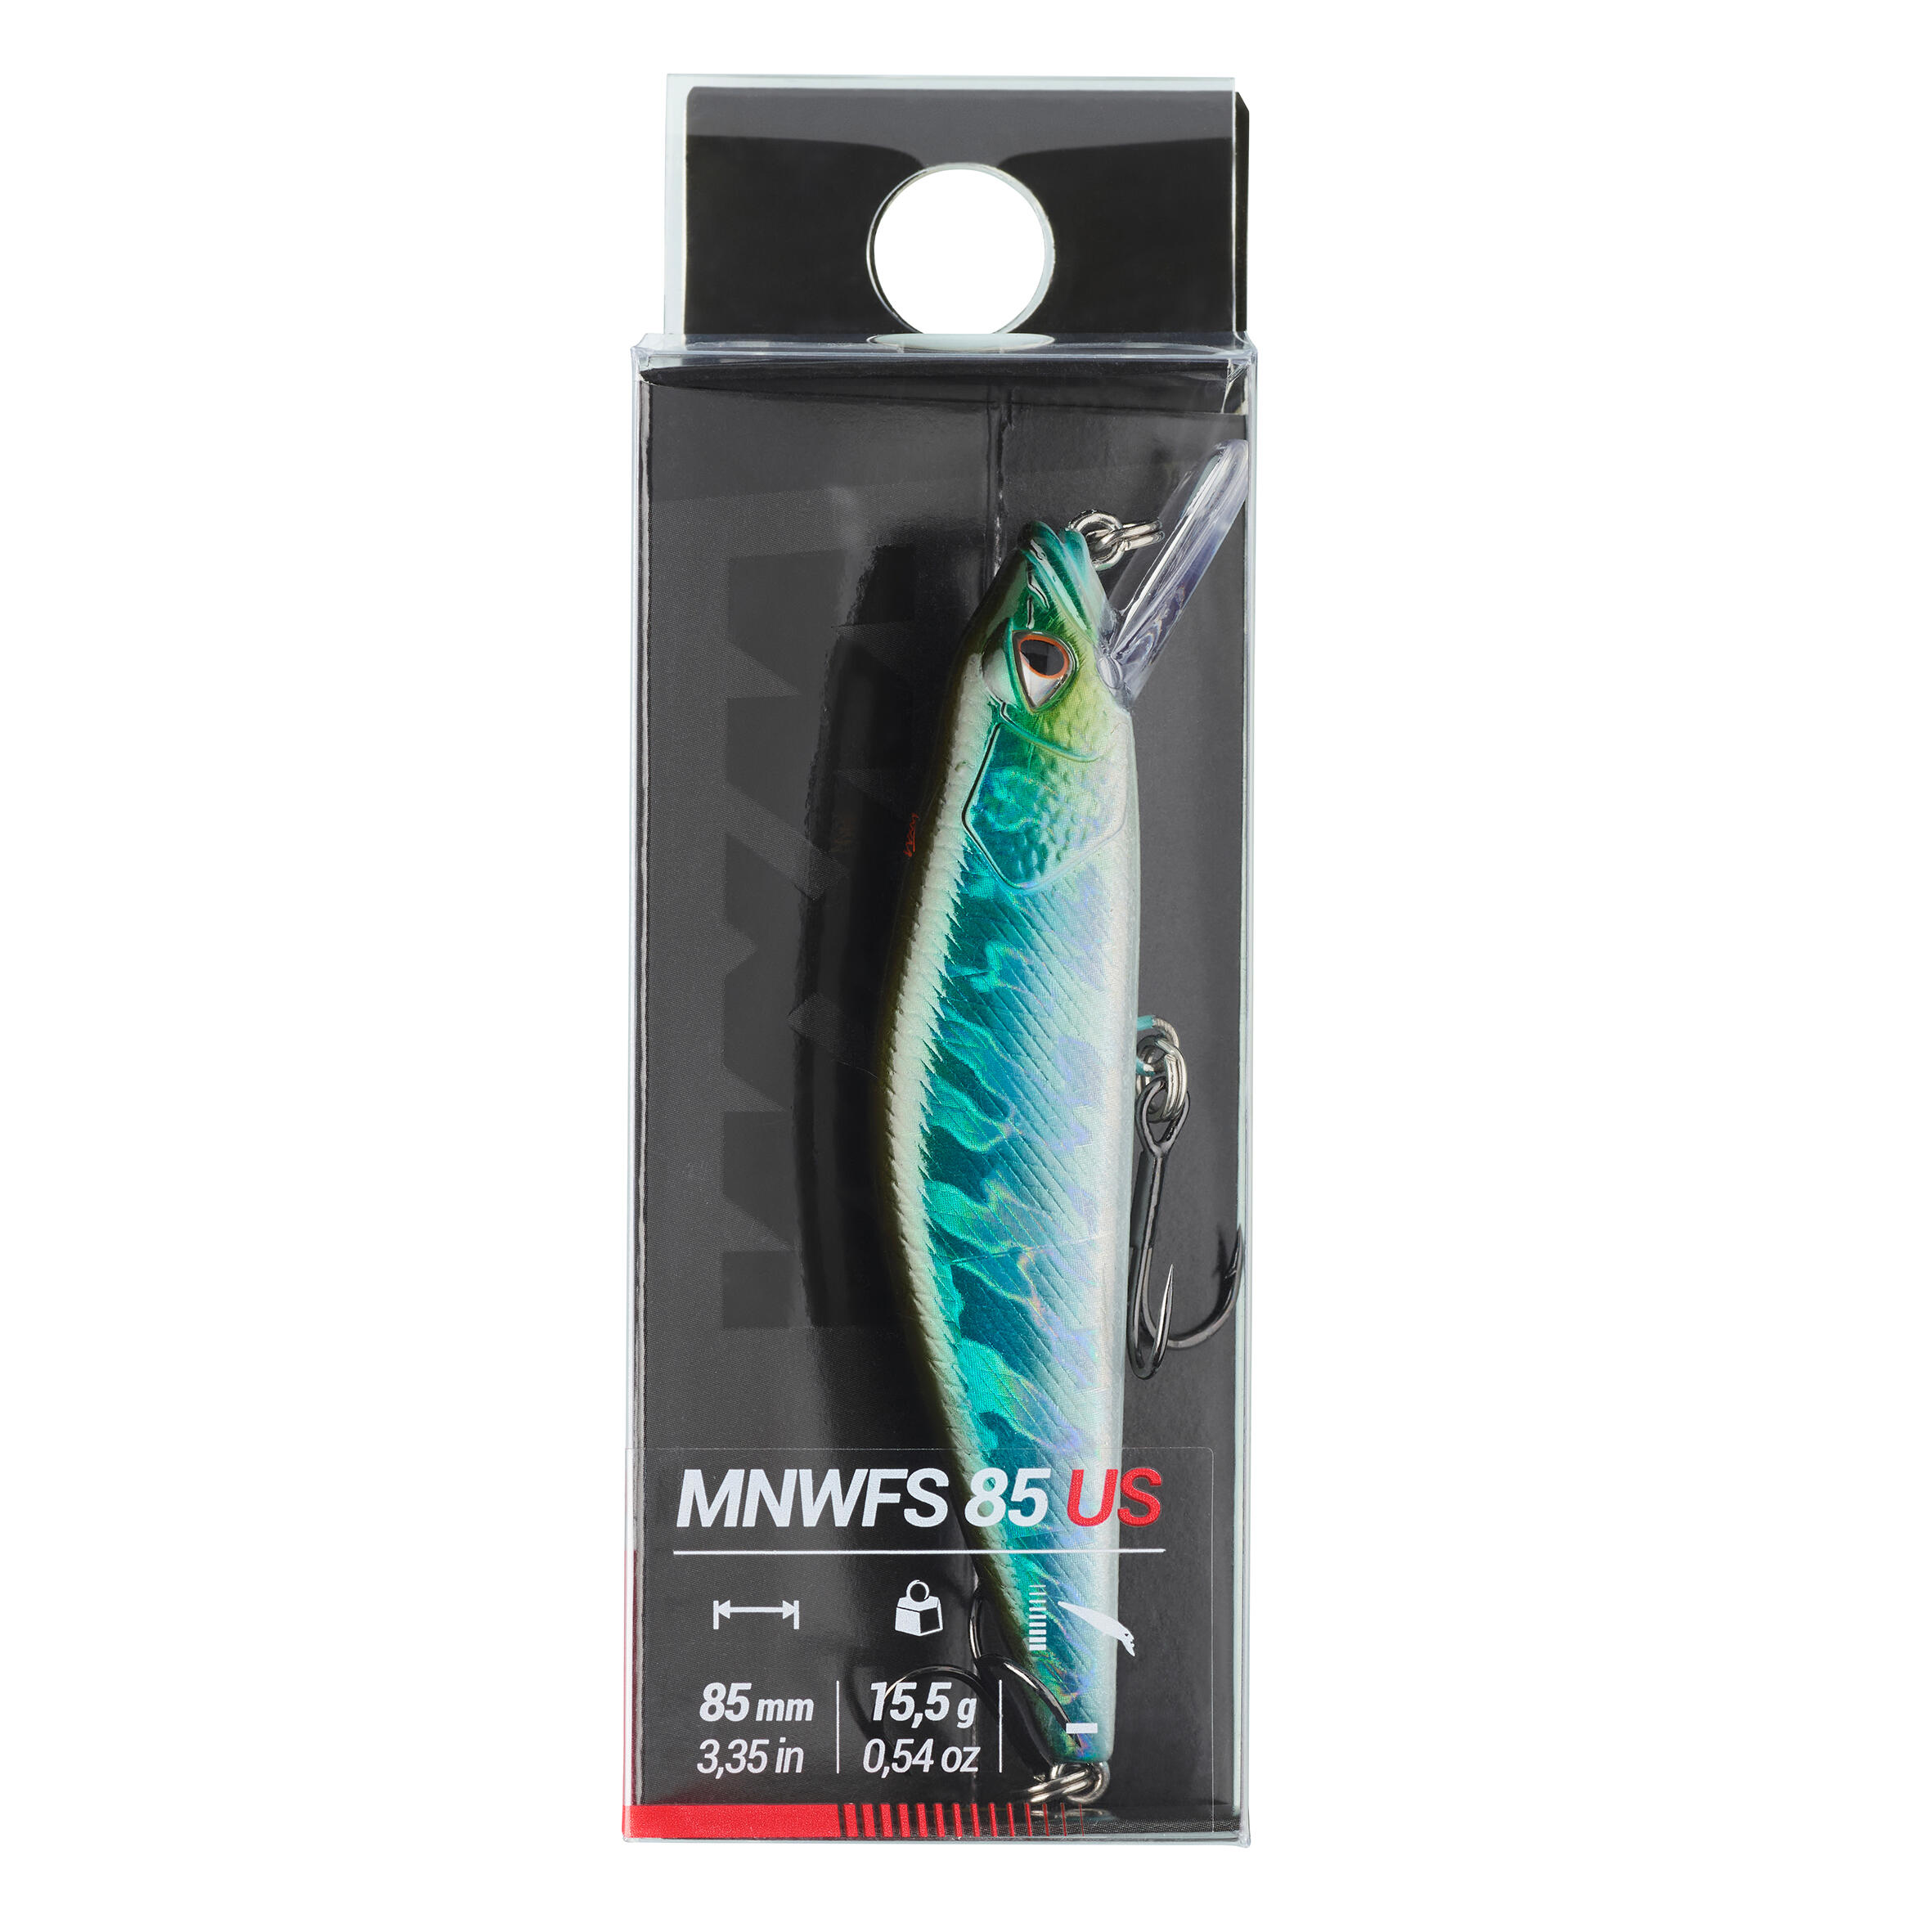 MINNOW HARD LURE FOR TROUT WXM MNWFS 85 US - BLUE BACK 4/4